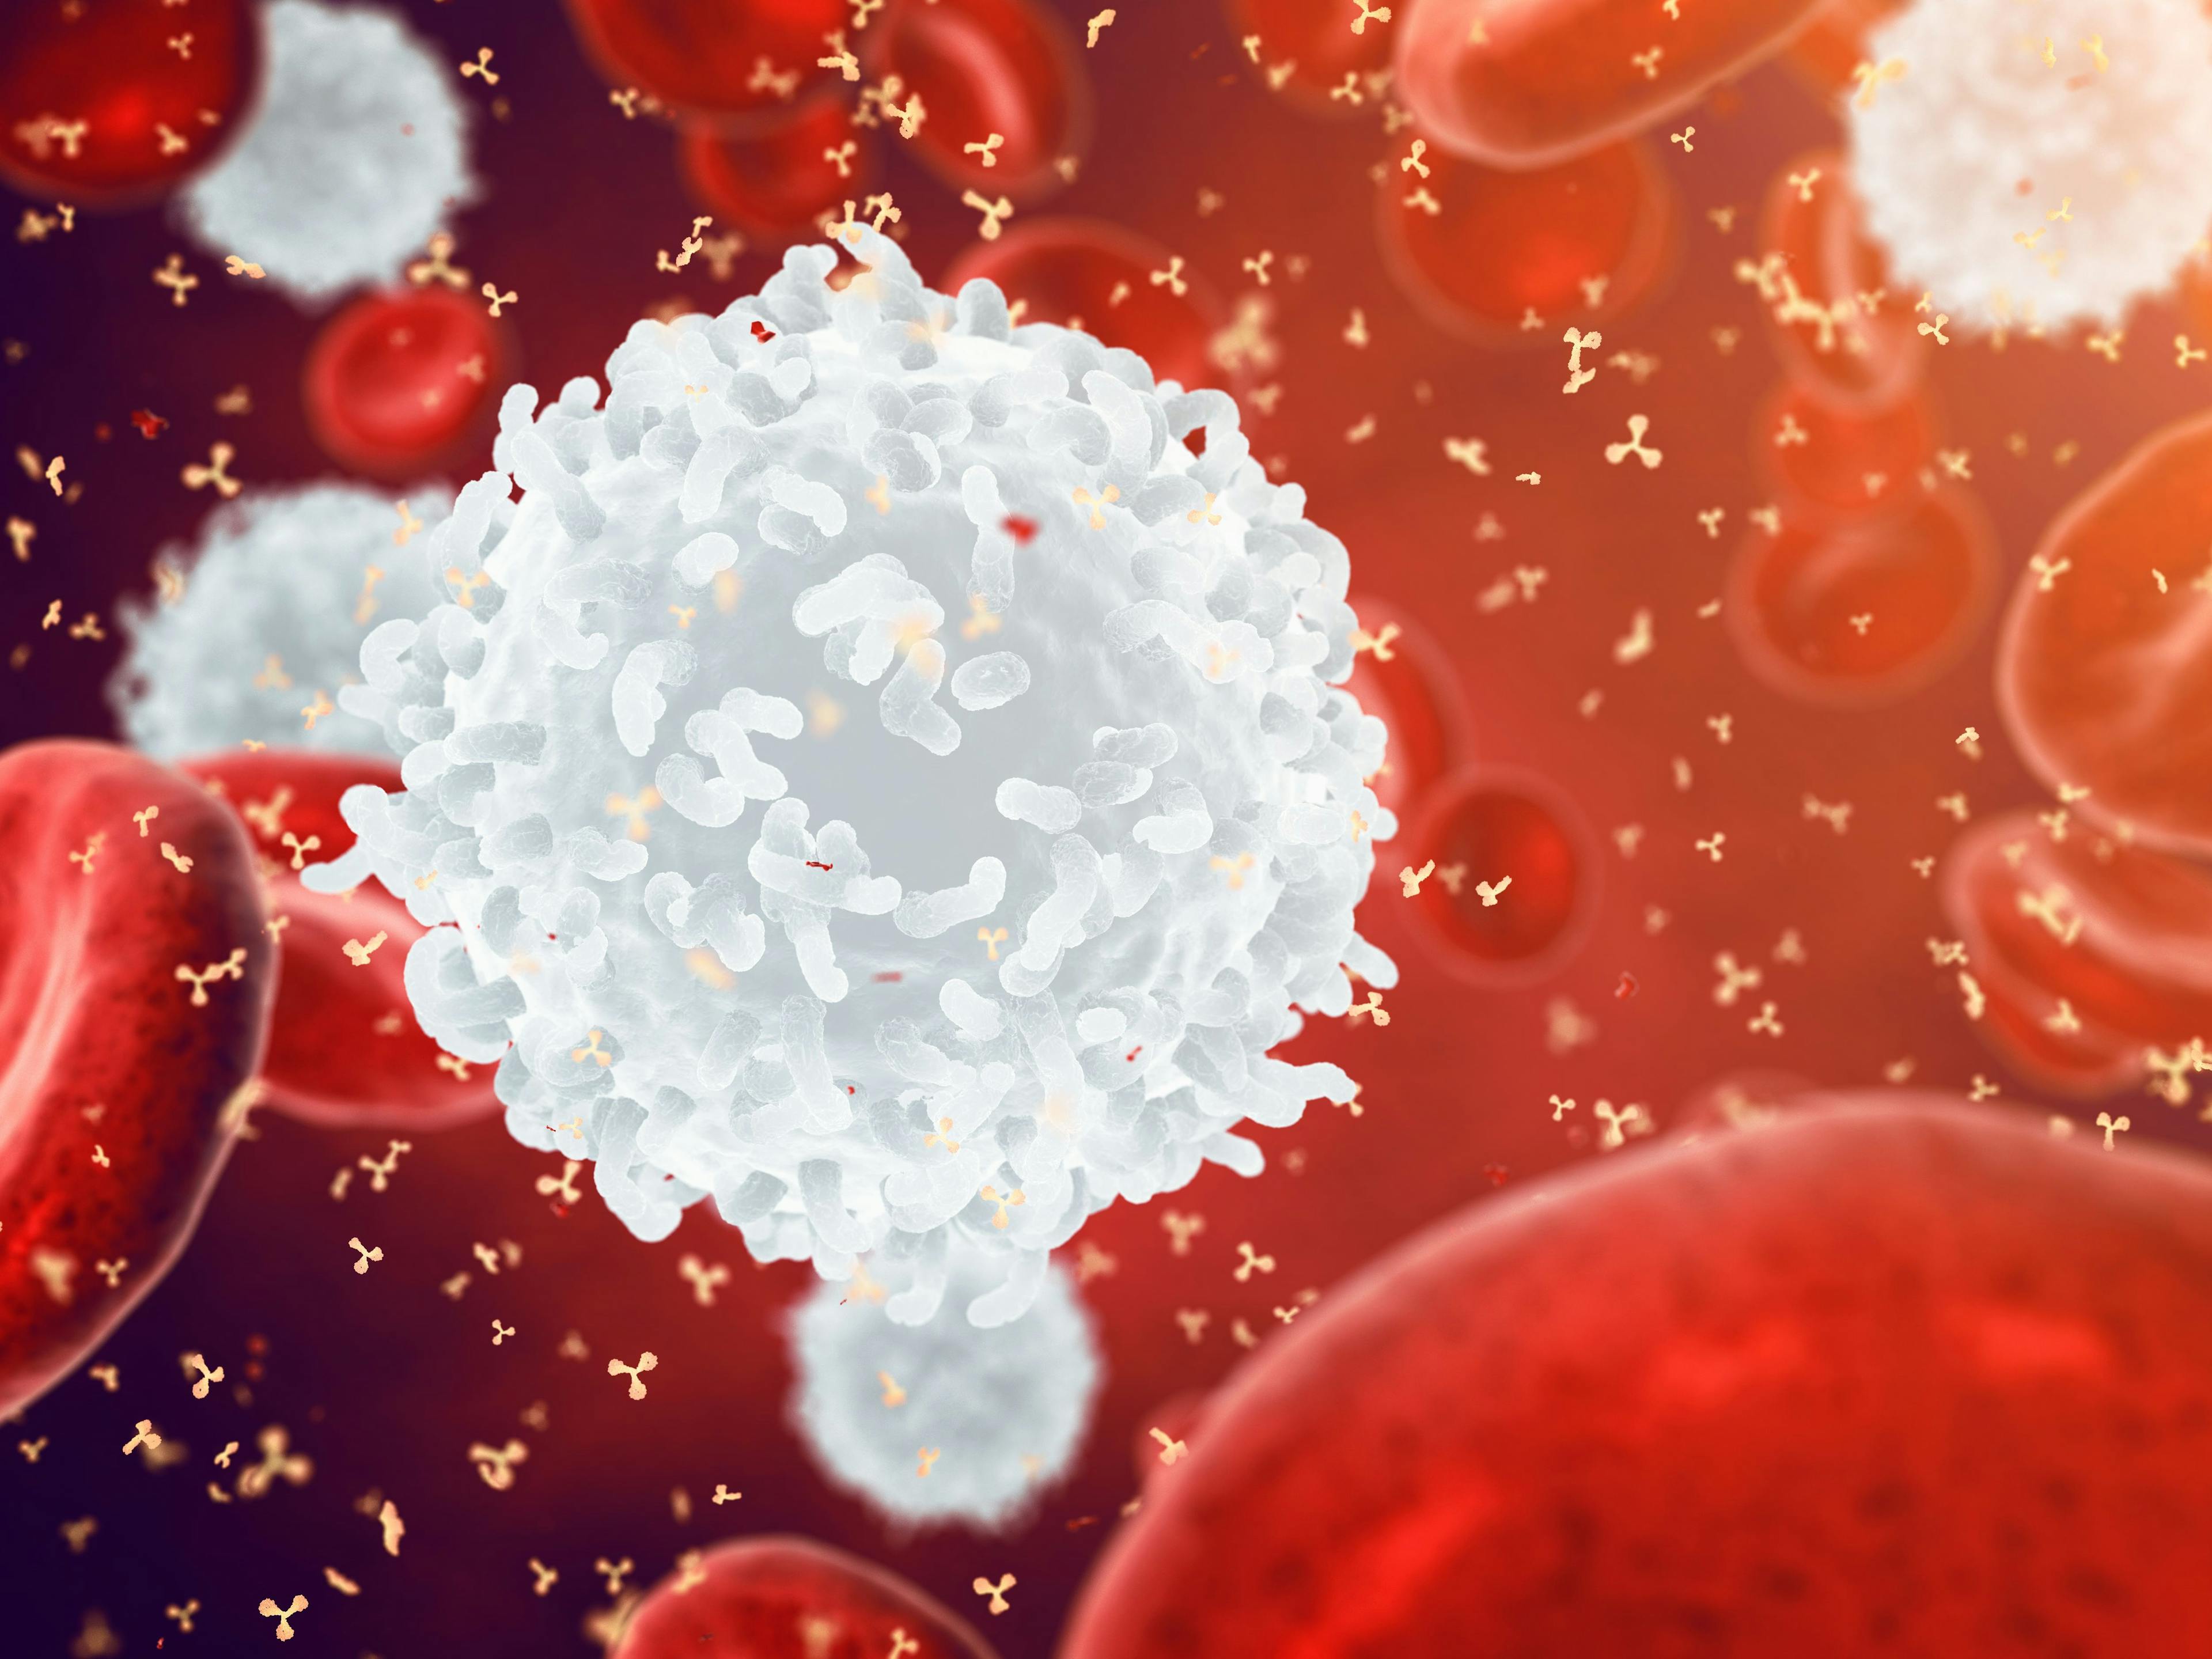 The Power of the Immune System: New Treatment for Painful Blood Cancer Side Effect